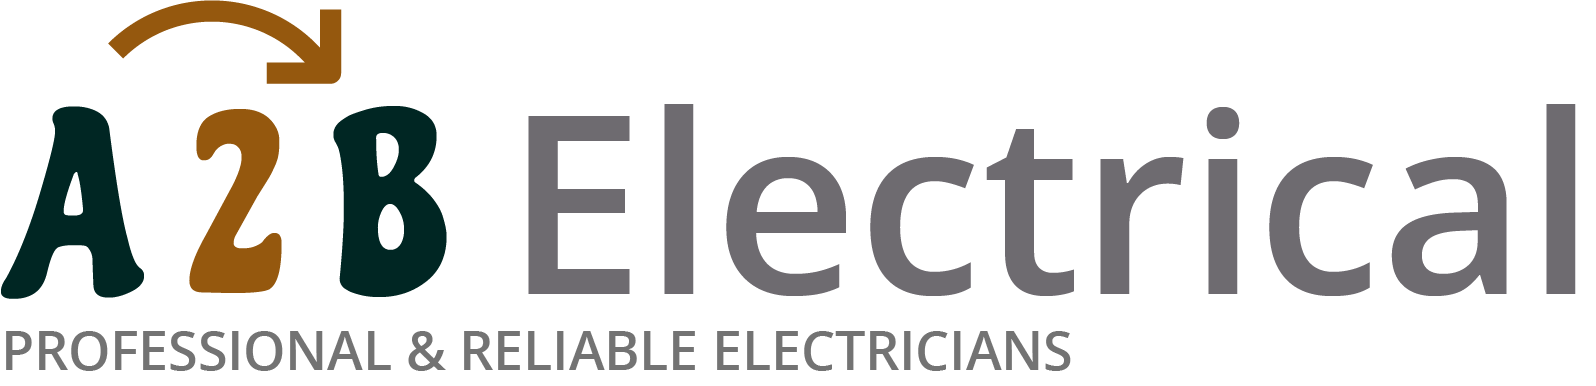 If you have electrical wiring problems in Horley, we can provide an electrician to have a look for you. 